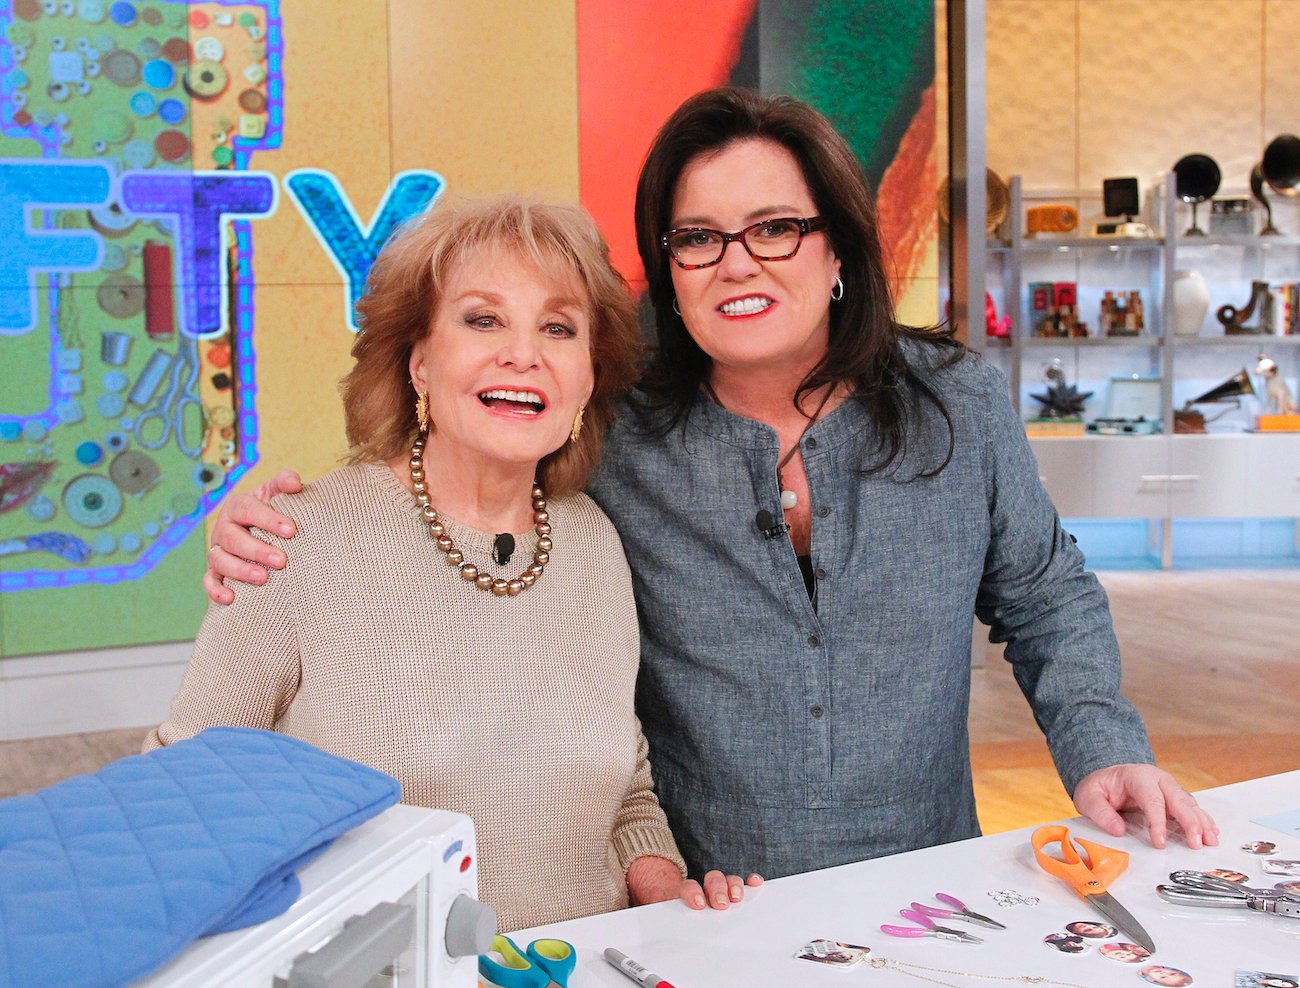 Barbara Walters and Rosie O'Donnell of 'The View'